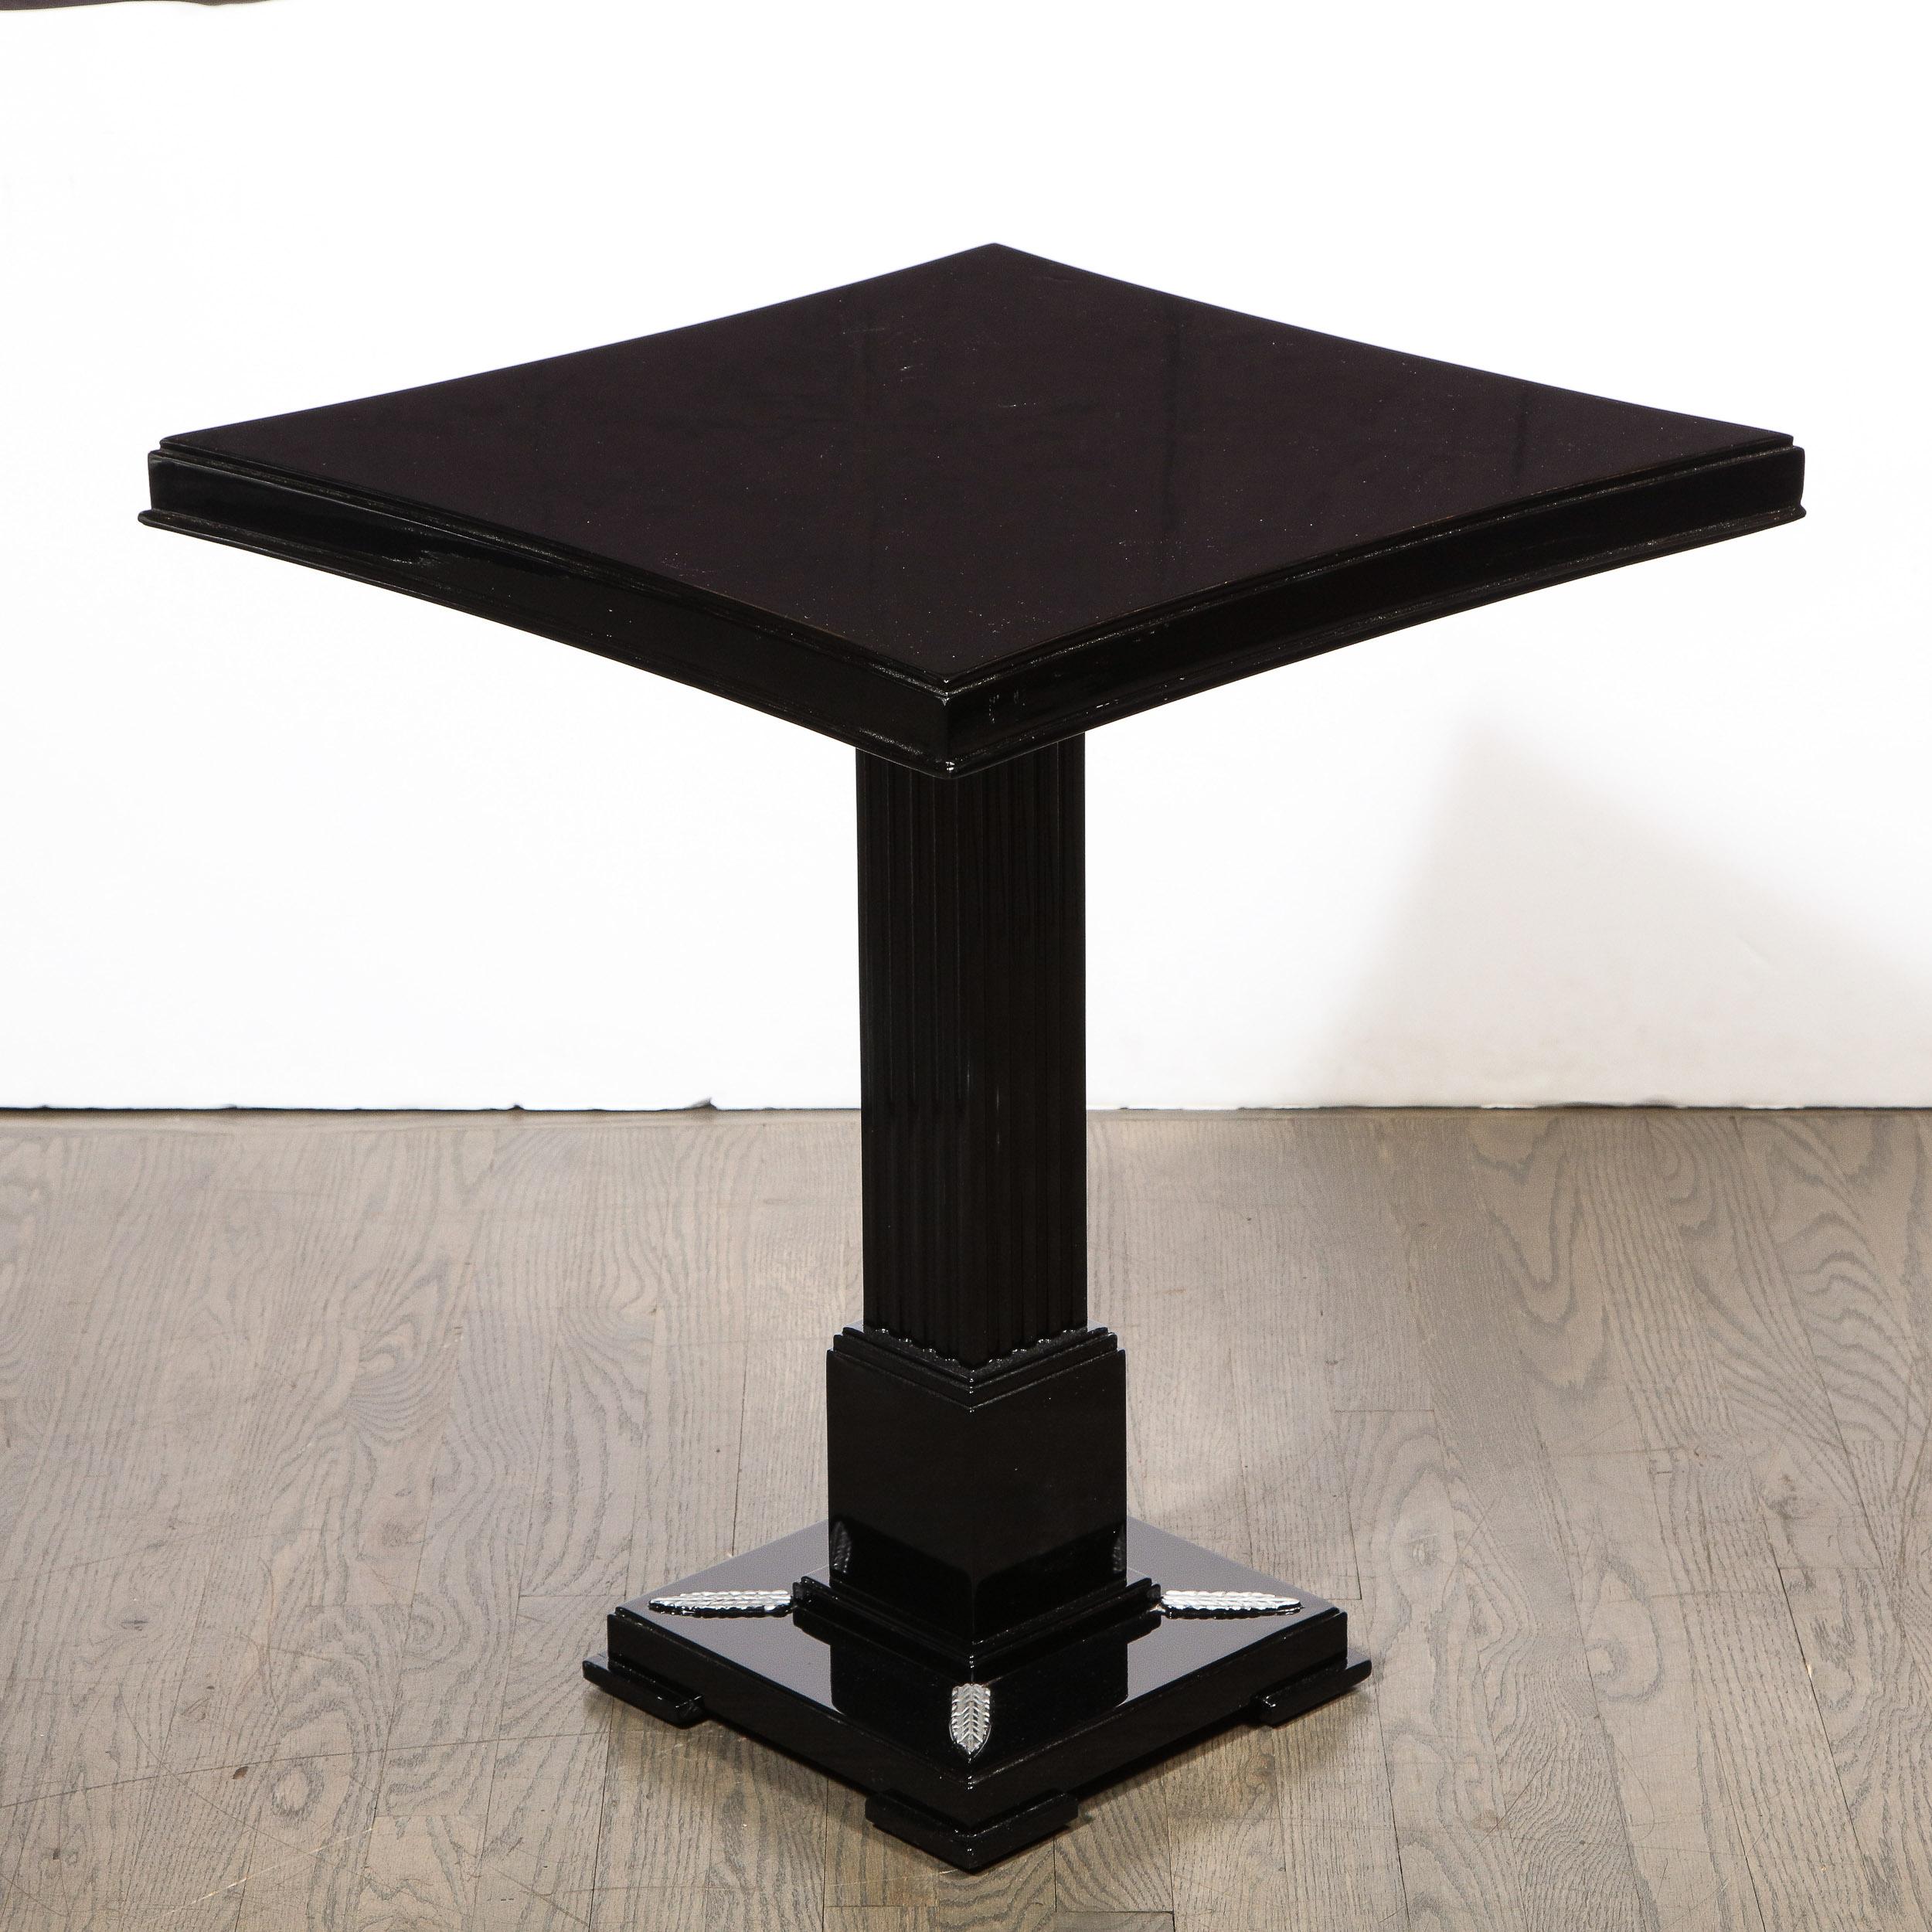 Pair of Occasional Tables in Black Lacquer with Pedestal Bases by Grosfeld House In Excellent Condition For Sale In New York, NY